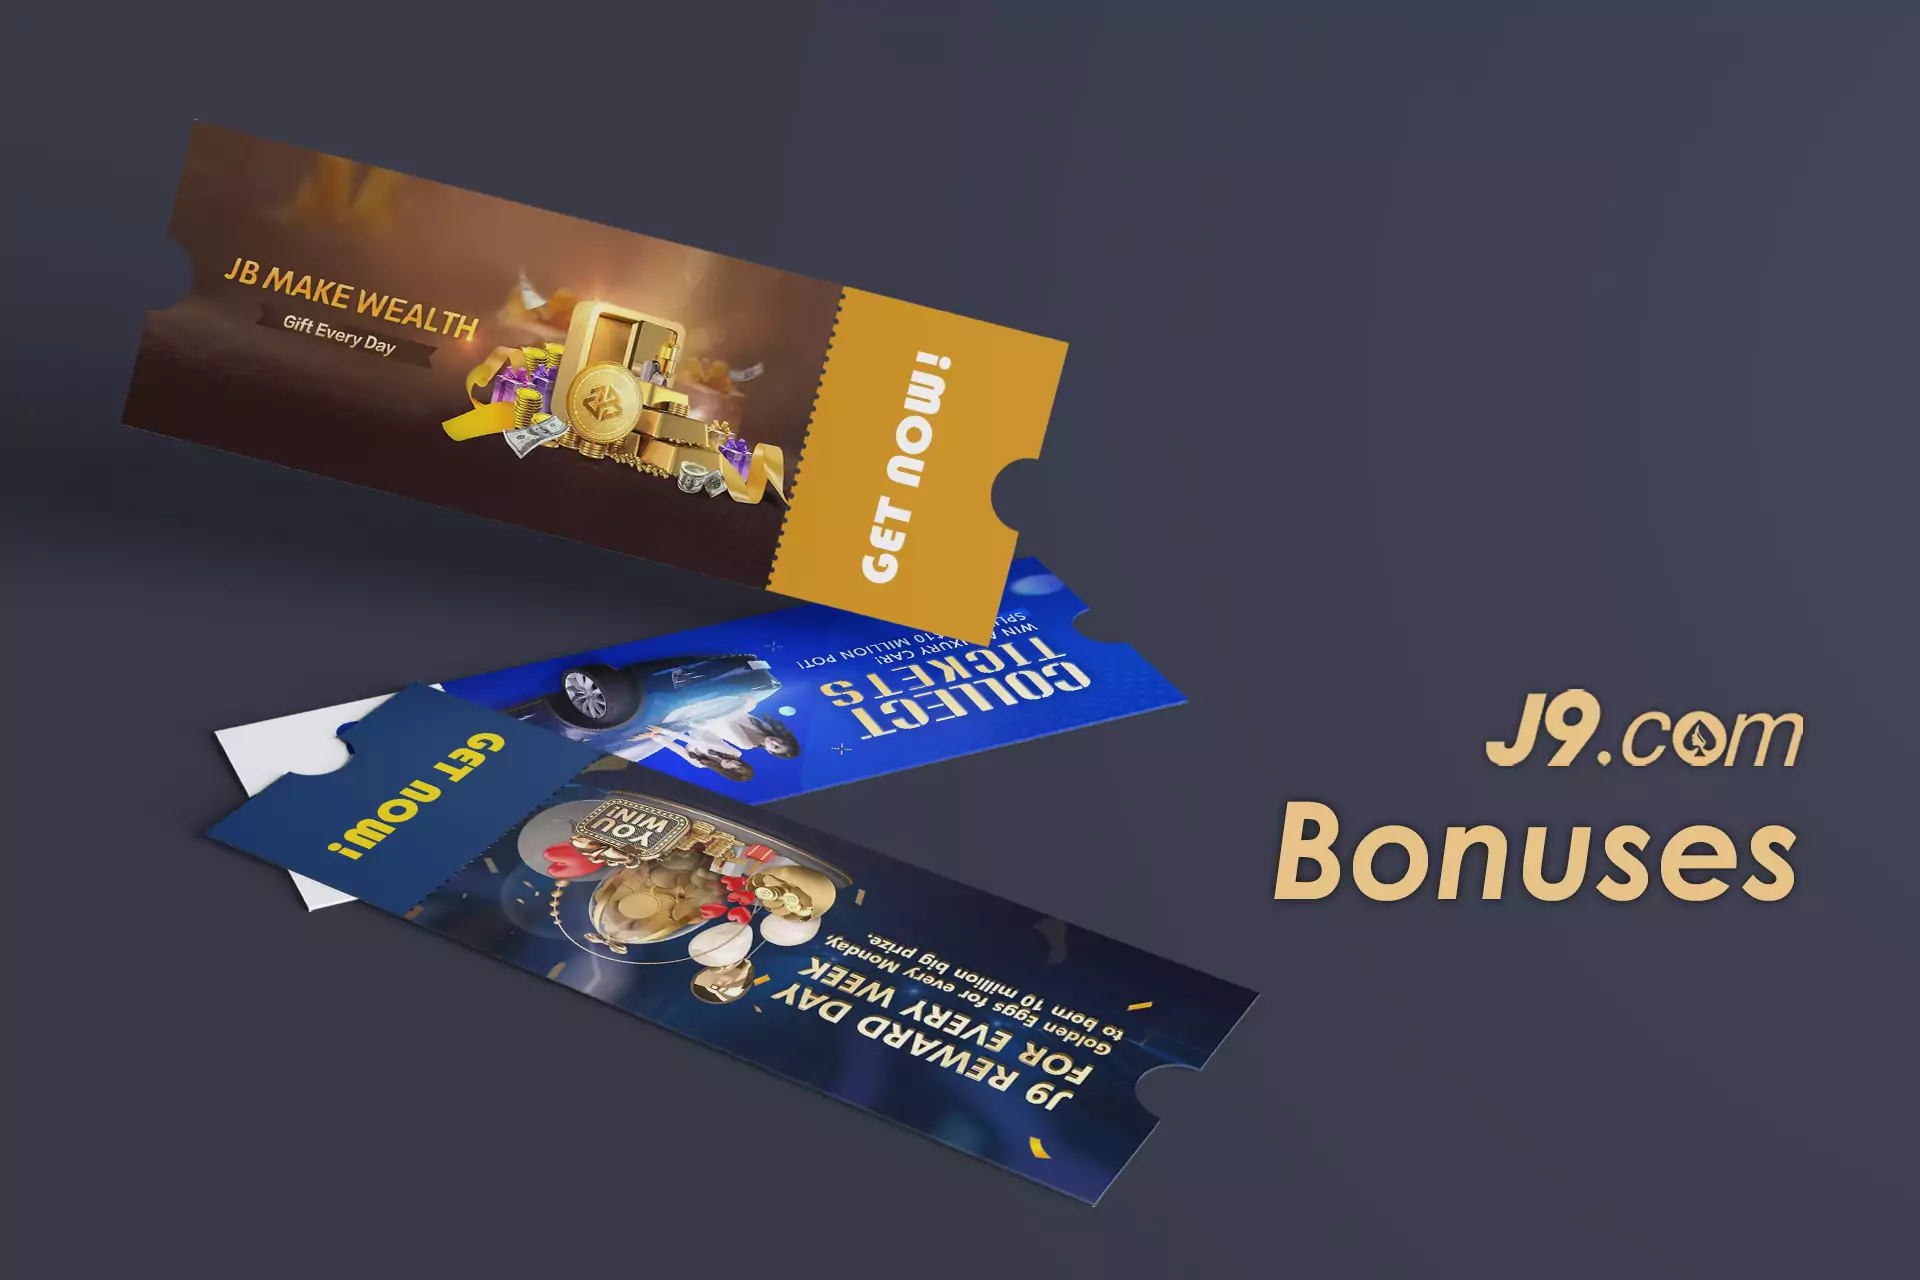 There are a few bonus offers at J9 that help users to increase the profit of betting on sports.